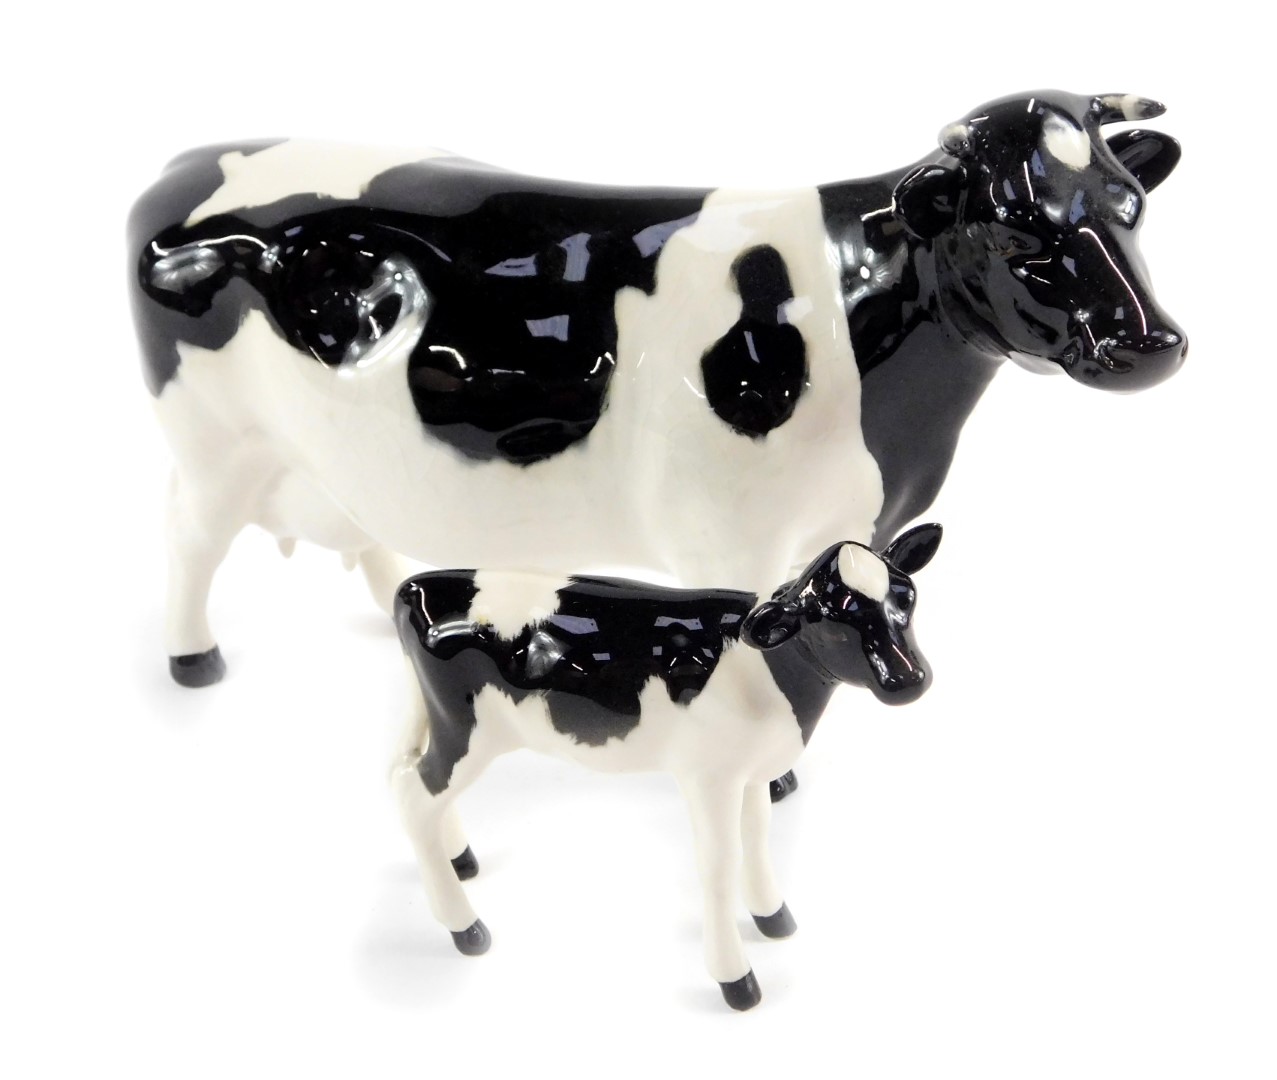 A Beswick figure modelled as a Friesian cow, 13cm H, together with a Friesian calf, 7.5cm, both